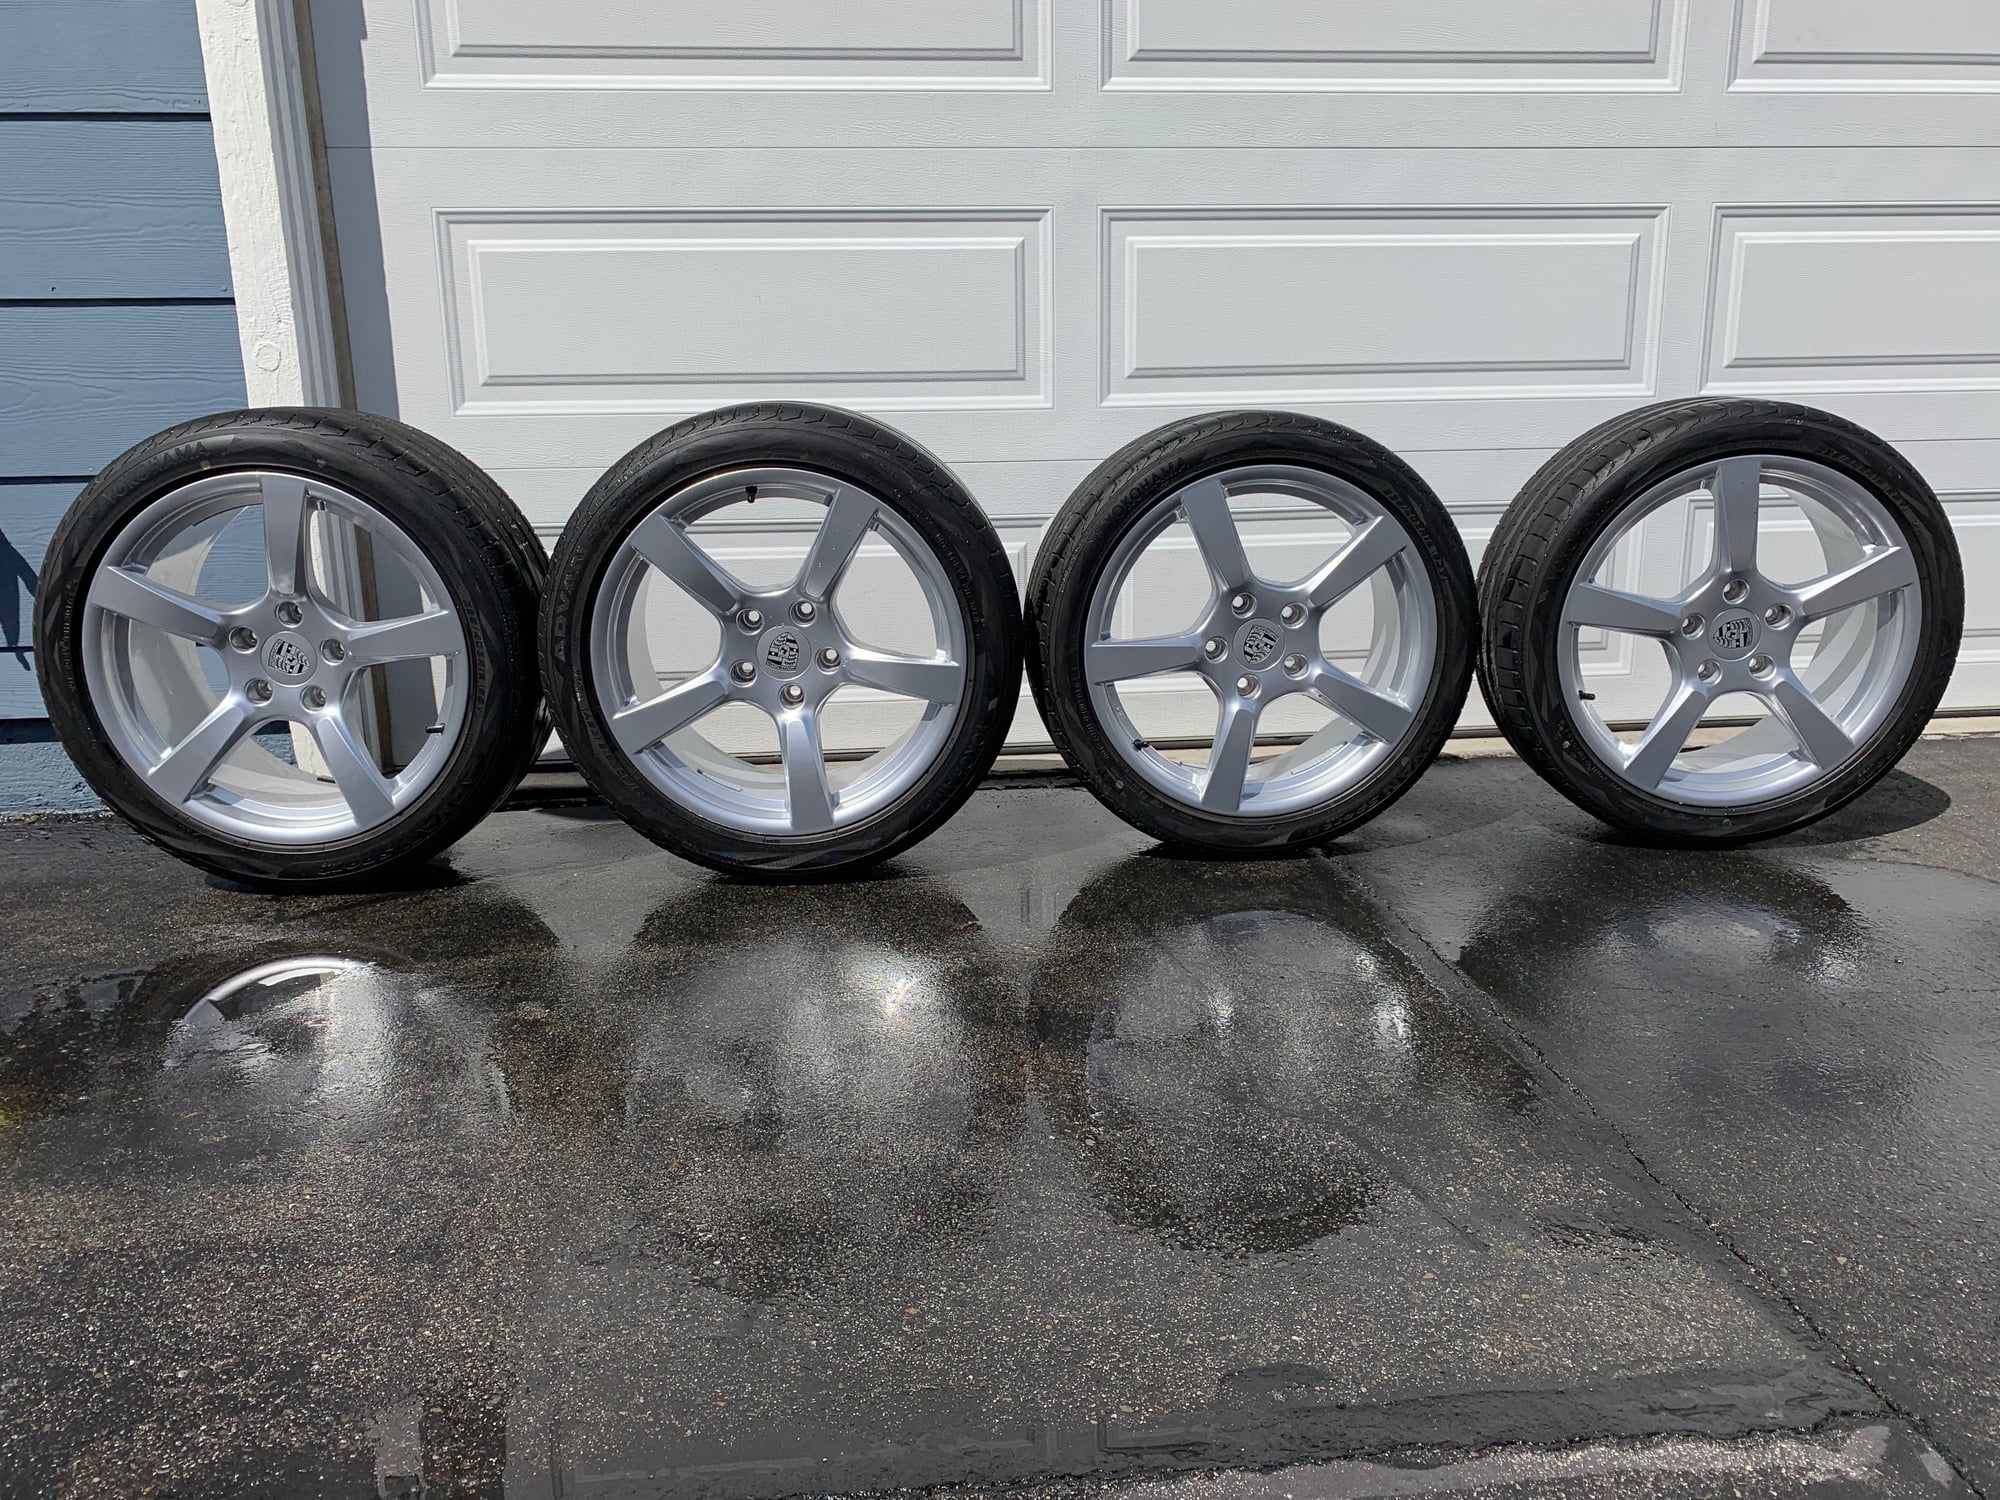 Wheels and Tires/Axles - Porsche 718 Cayman S 19" Wheels and Tires - 1300 miles - Used - 2013 to 2019 Porsche Boxster - 2013 to 2019 Porsche Cayman - San Clemente, CA 92673, United States